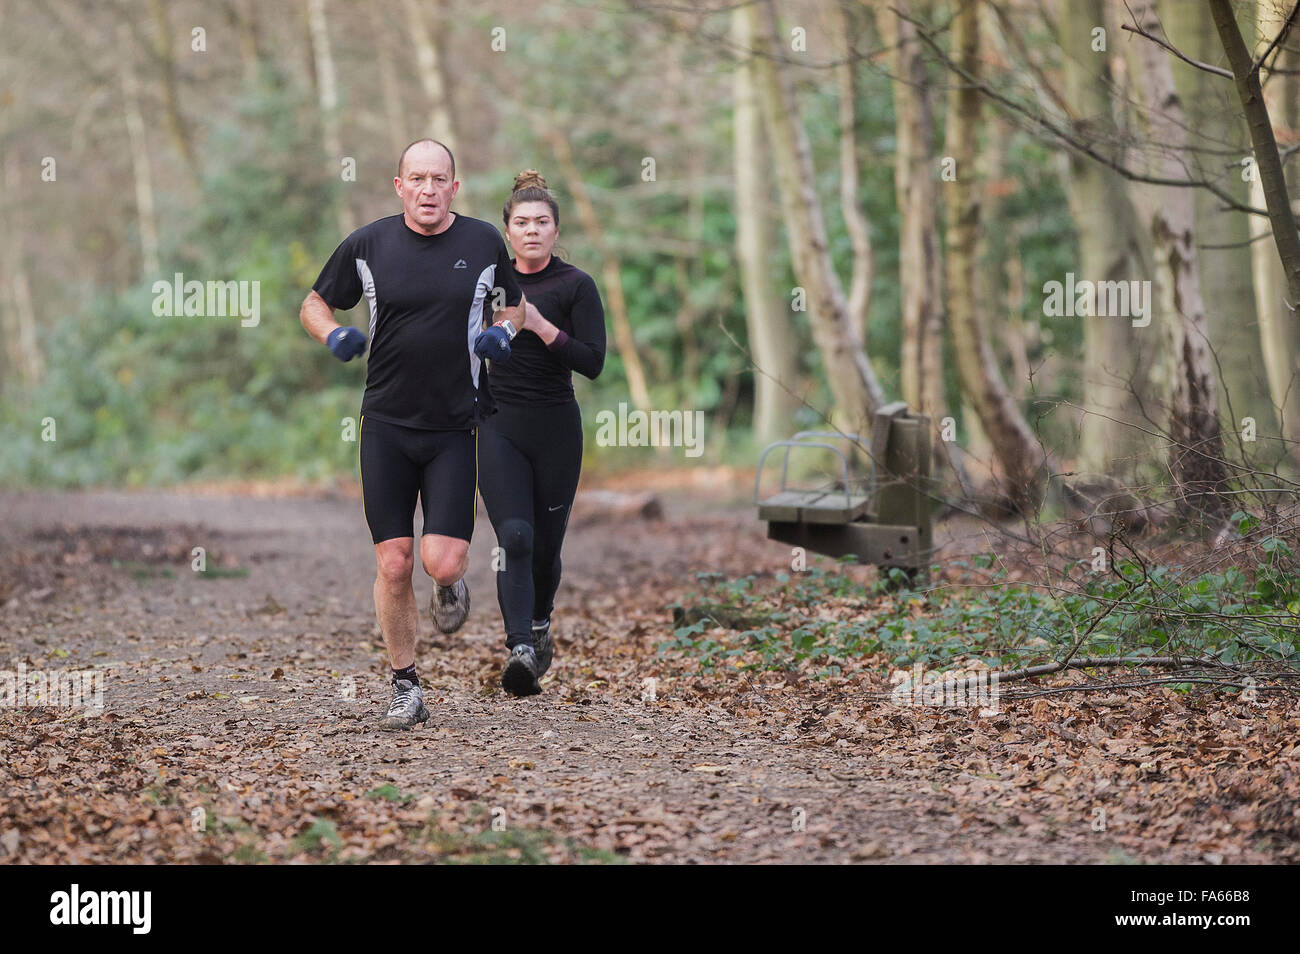 Runners exercise in Thorndon Park woodland in Essex, England, United Kingdom. Stock Photo